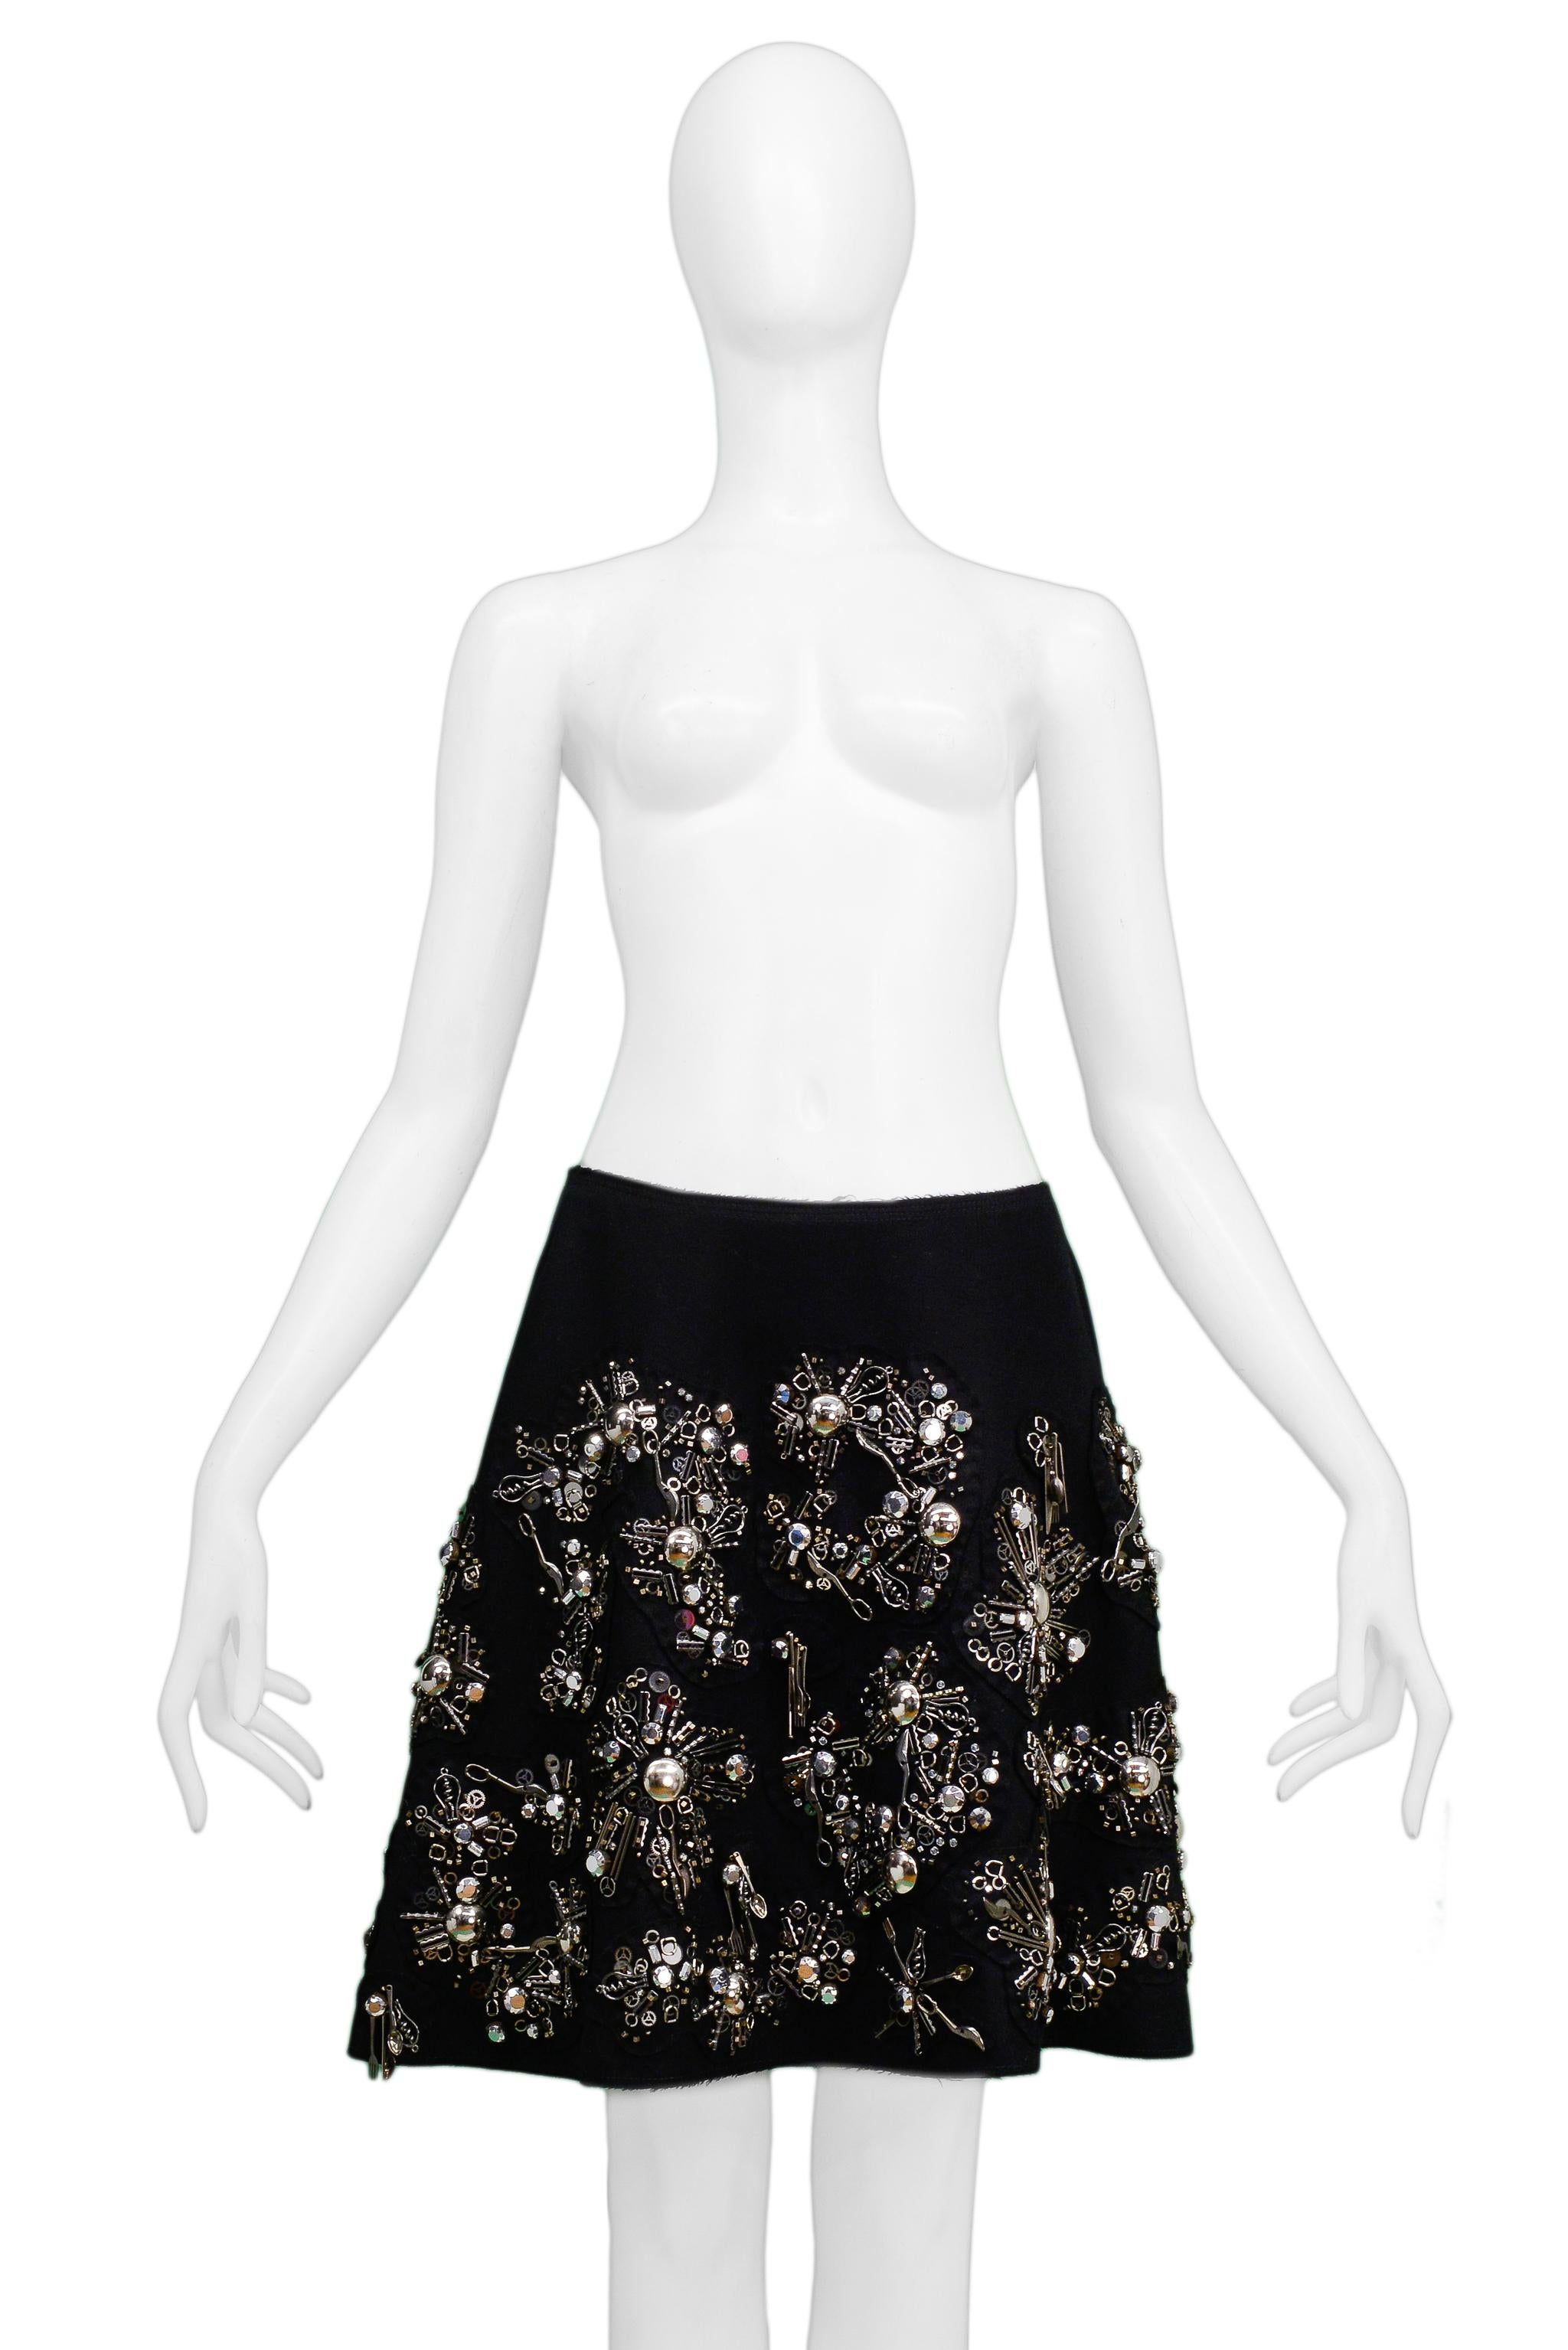 Prada Black Wrap Skirt With Silverware Charms 2006 In Excellent Condition For Sale In Los Angeles, CA